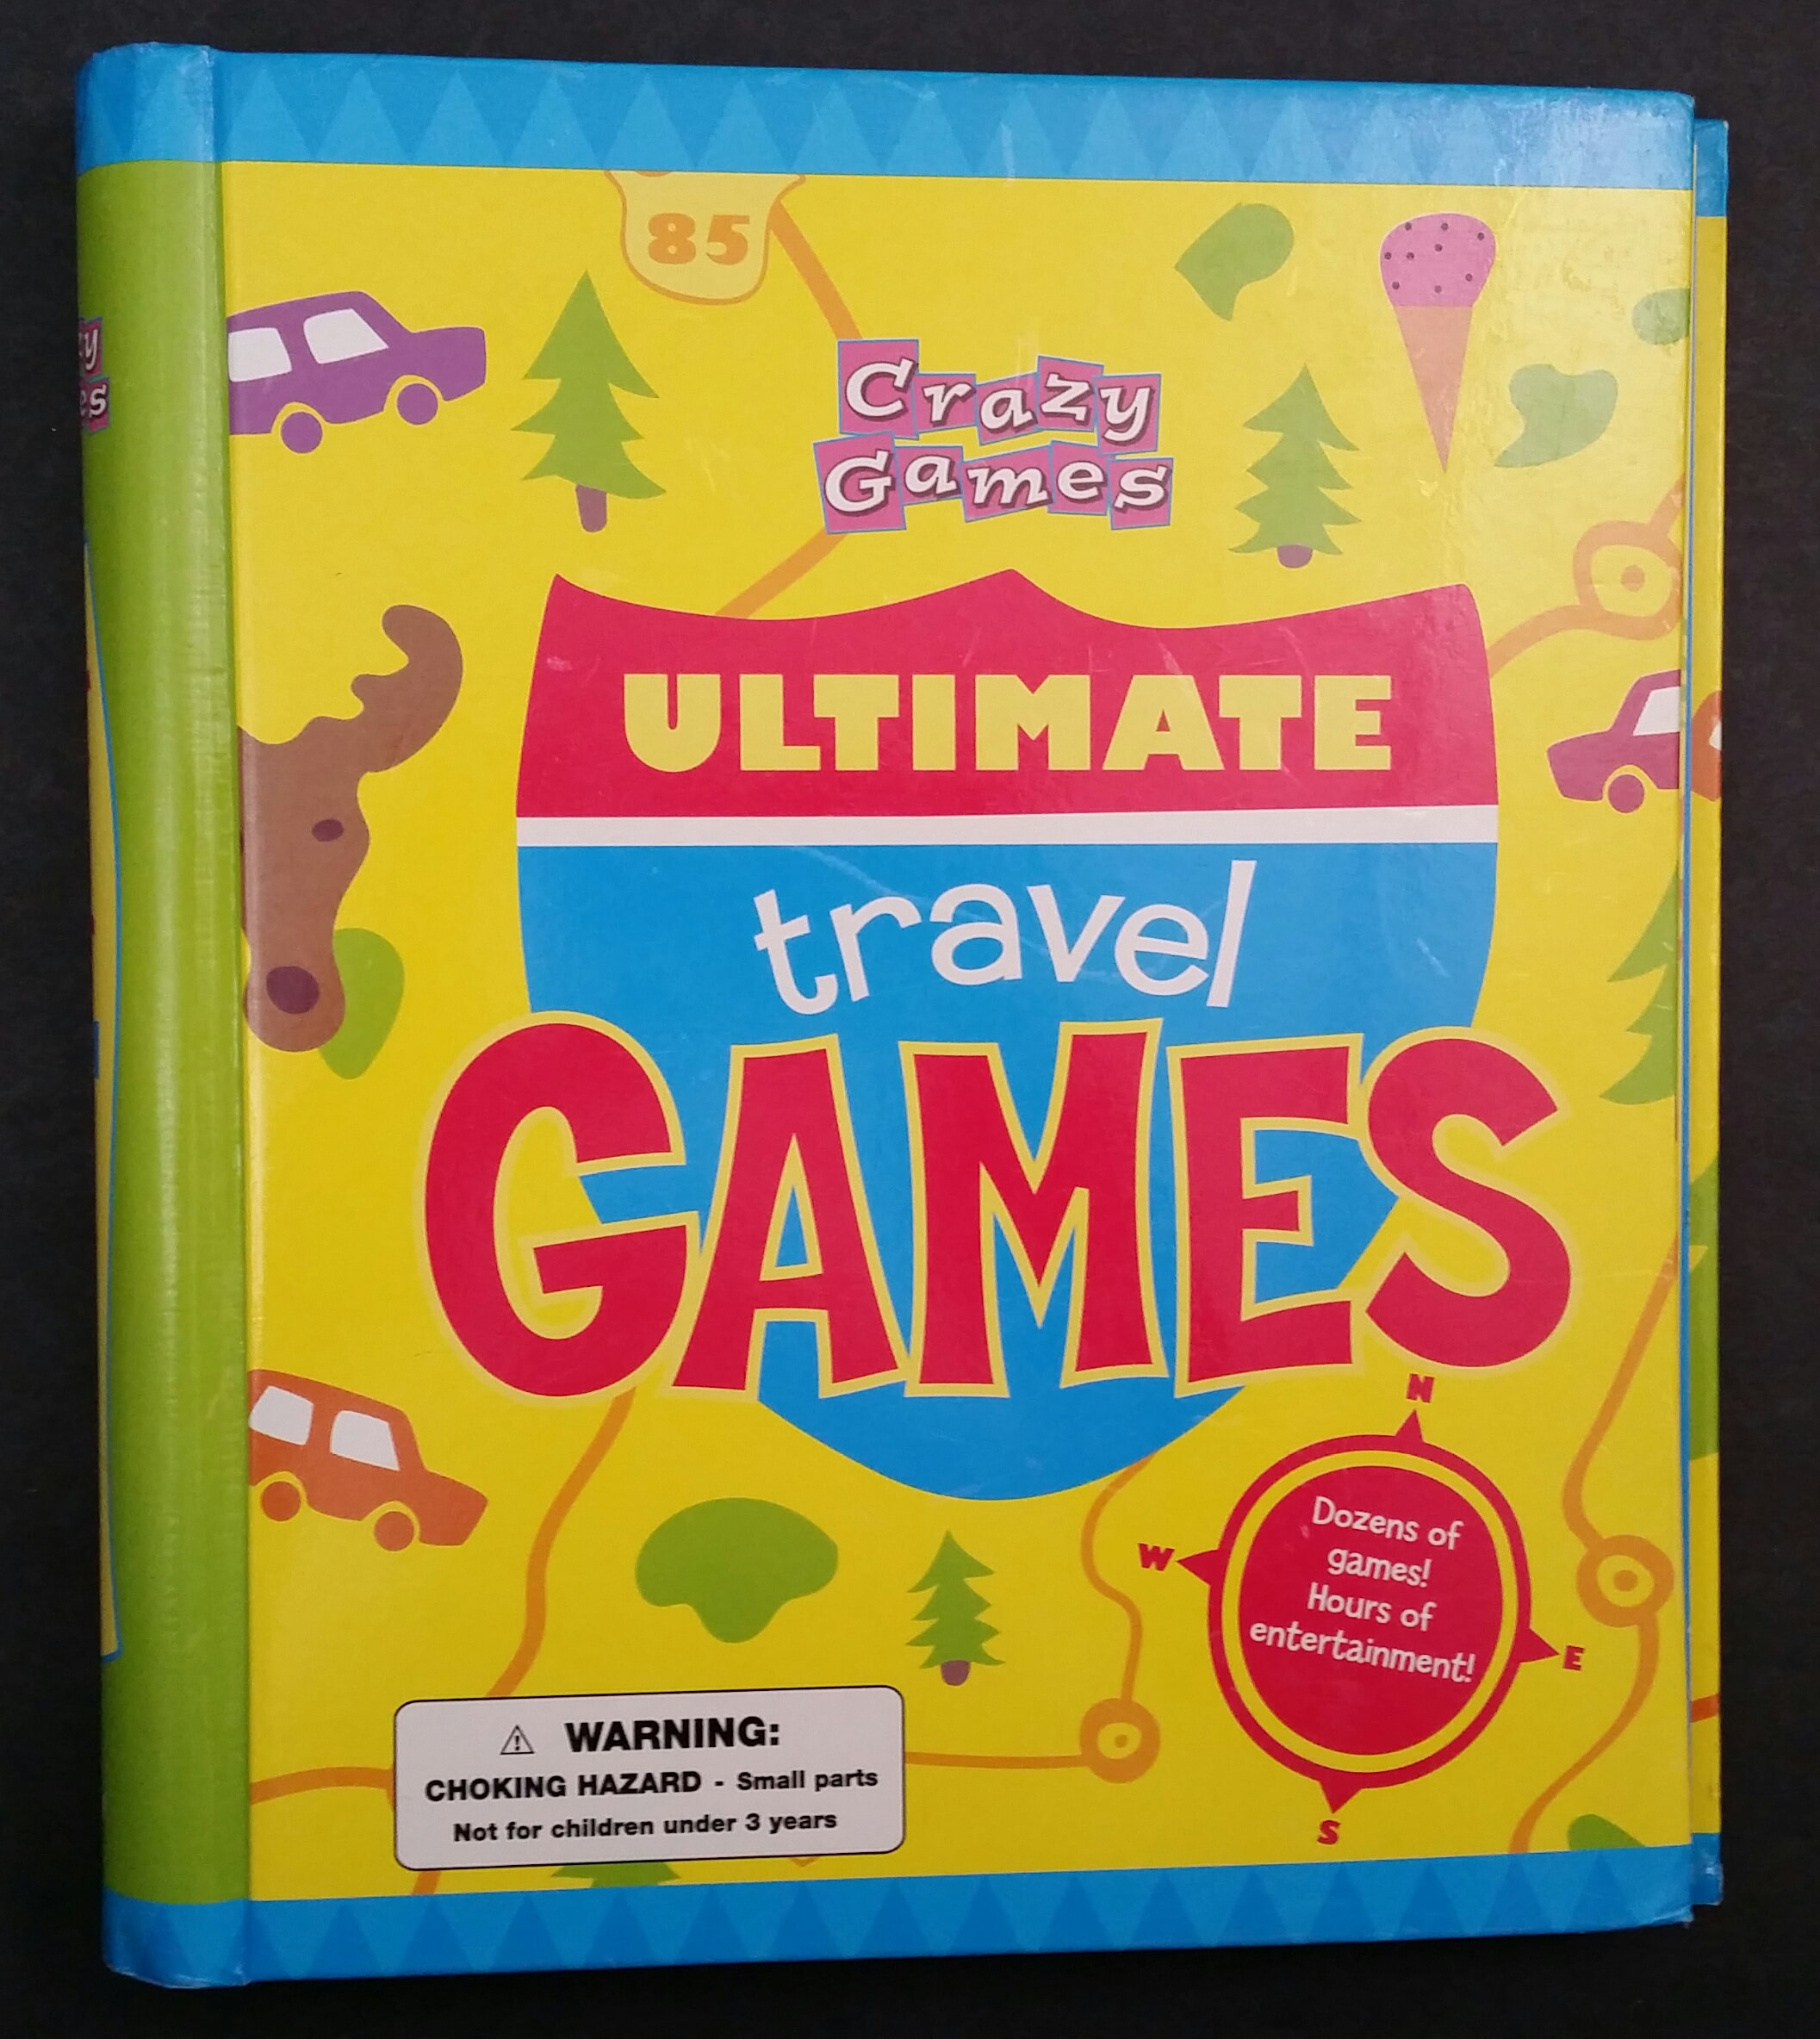 Crazy Games Ultimate Travel Games